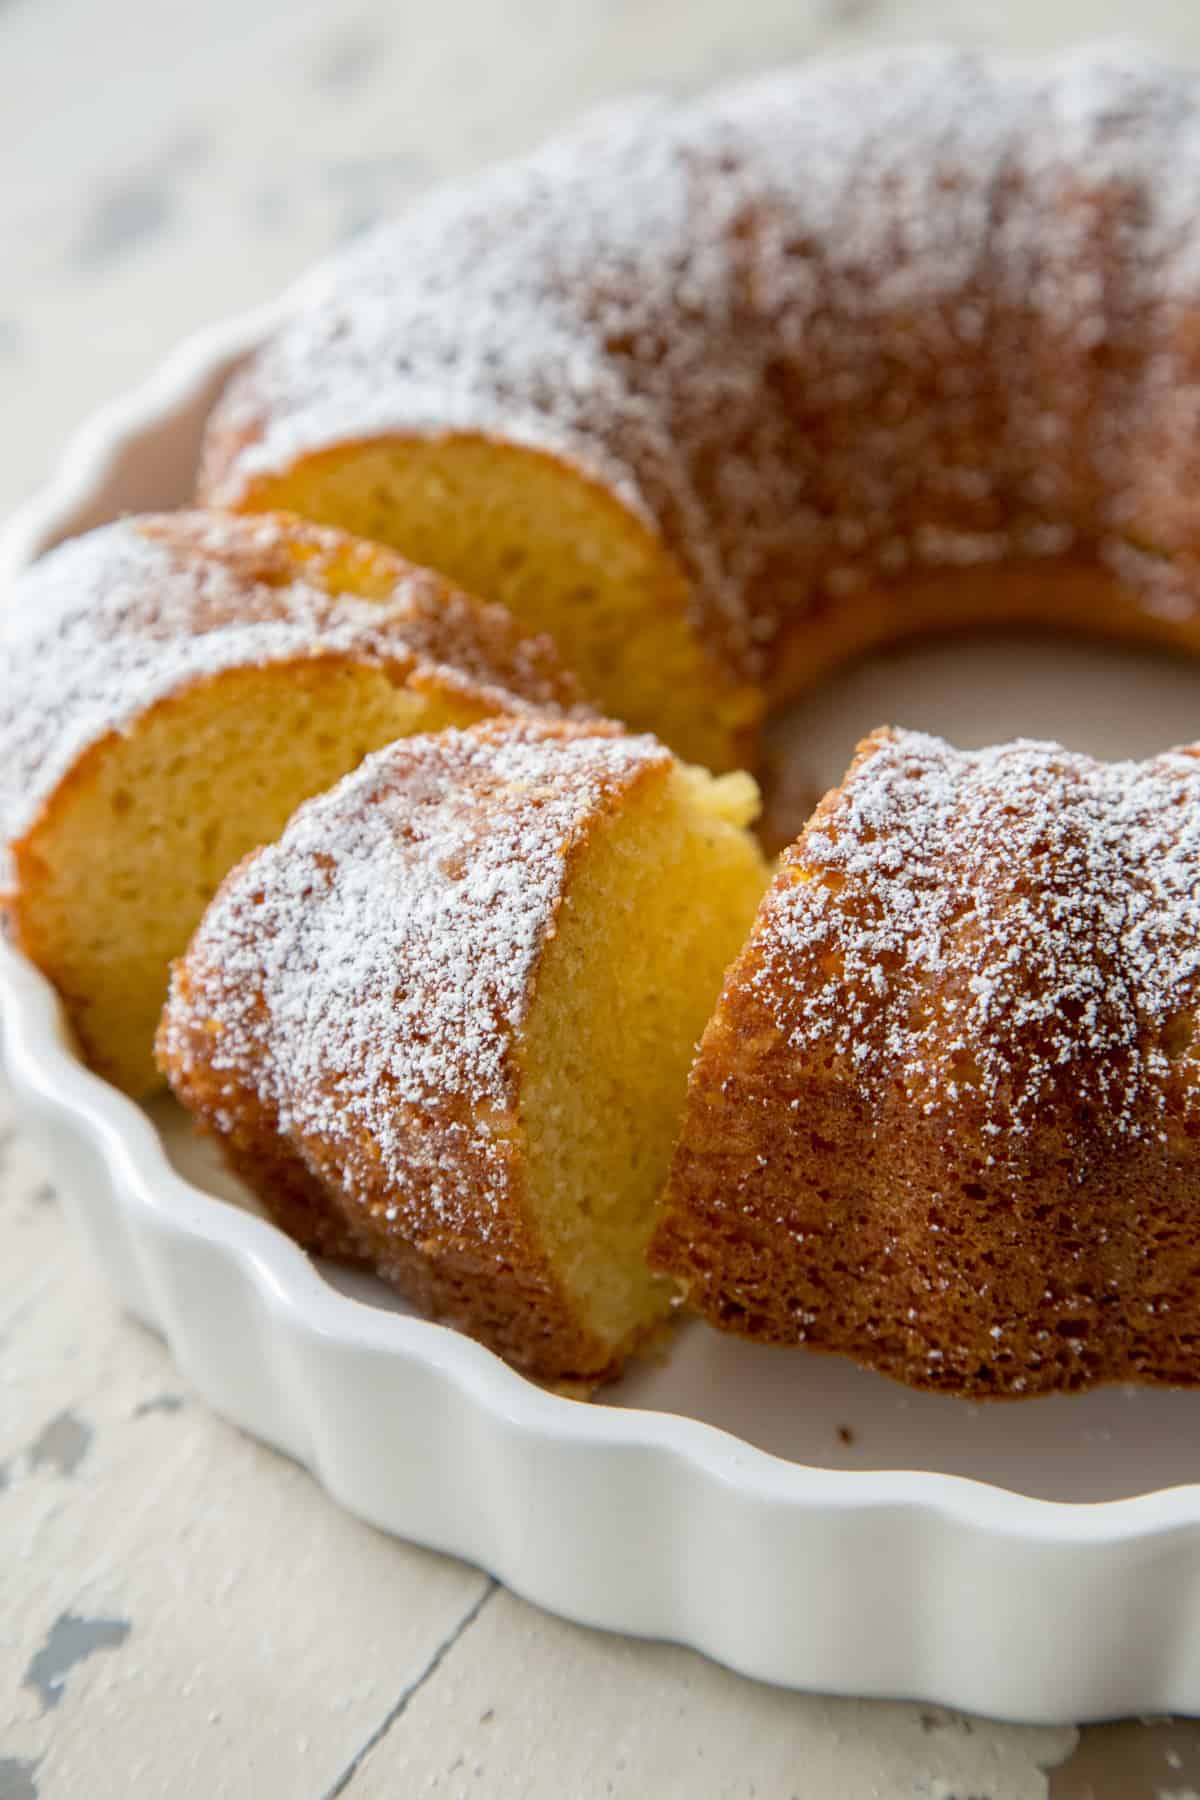 An eggnog Bundt cake in a white dish with two slices cut out of the cake.